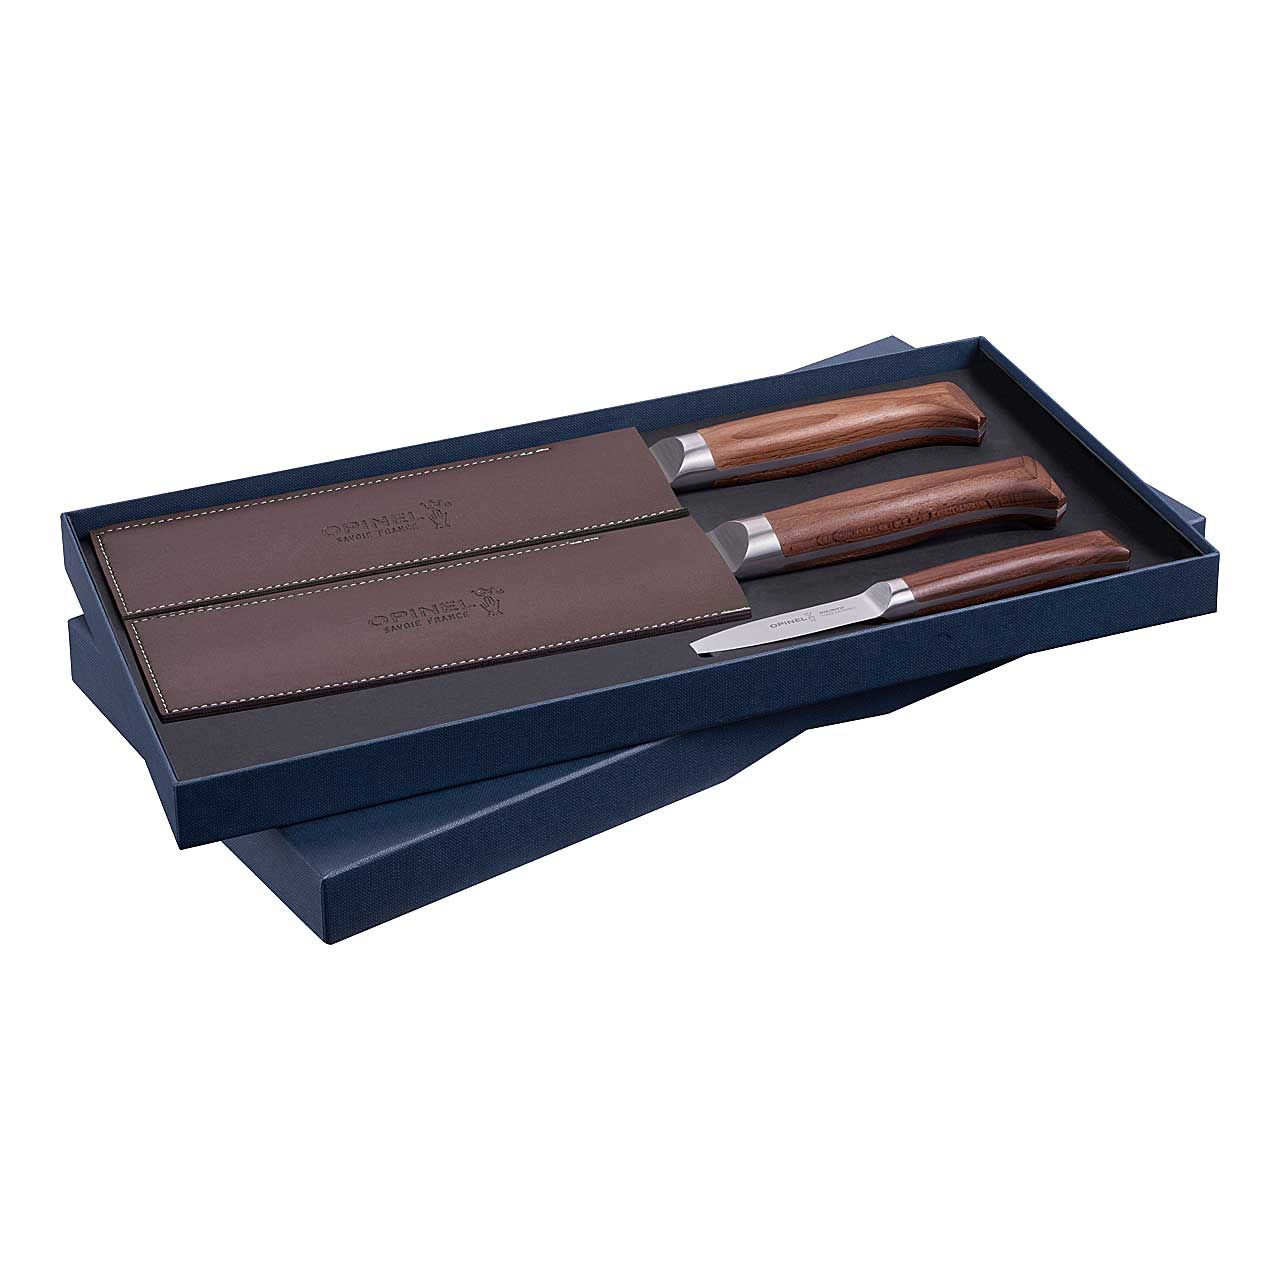 Opinel FORGES 1890, Trio Set - 254540